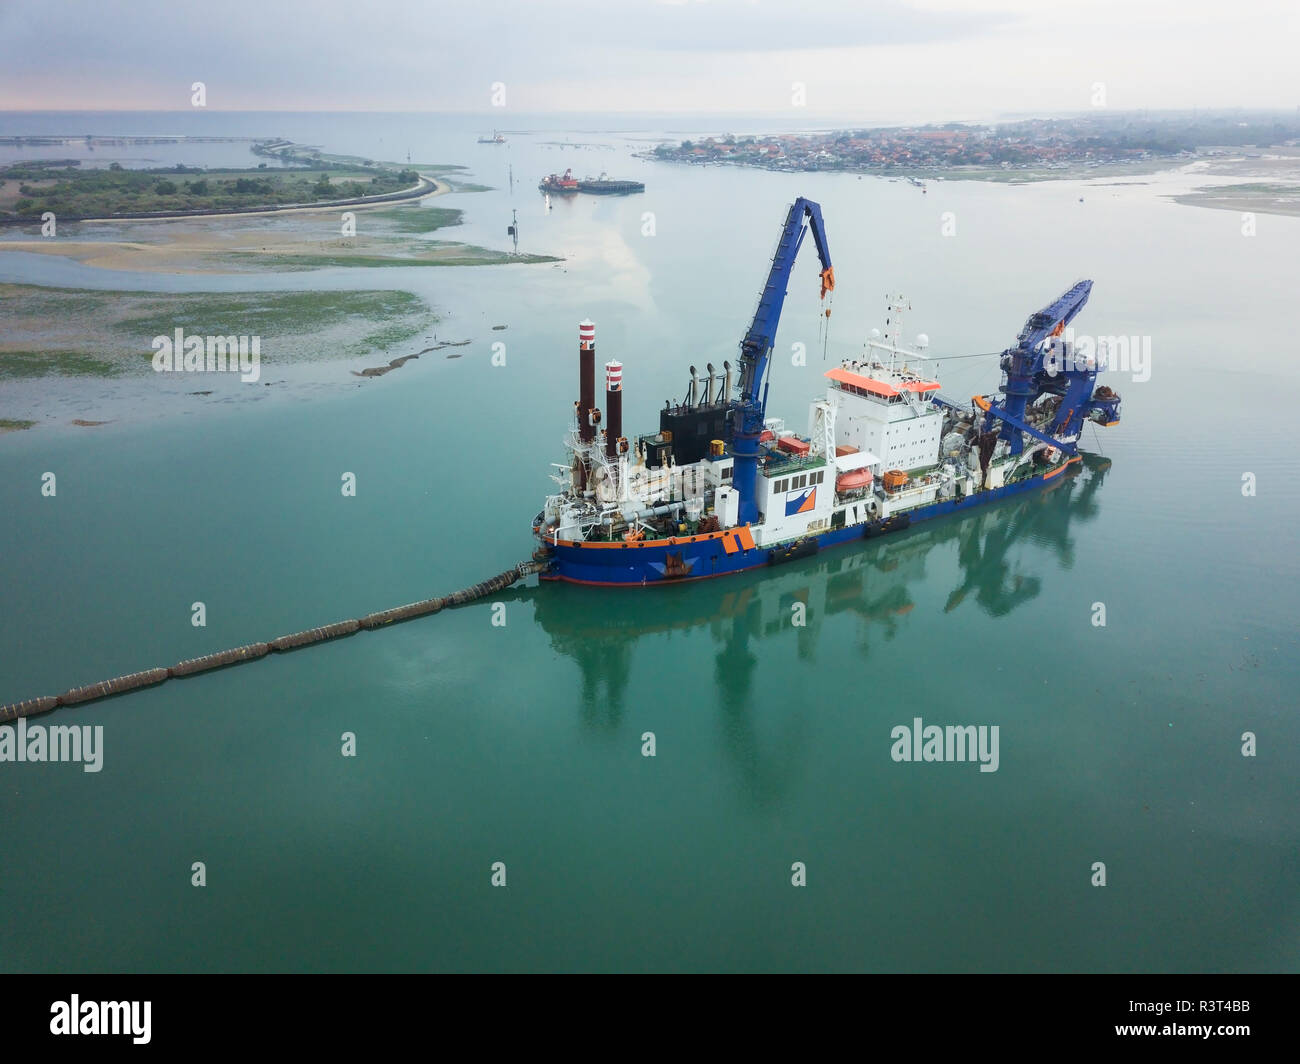 Indonesia, Bali, Aerial view of ship for petroleum production Stock Photo